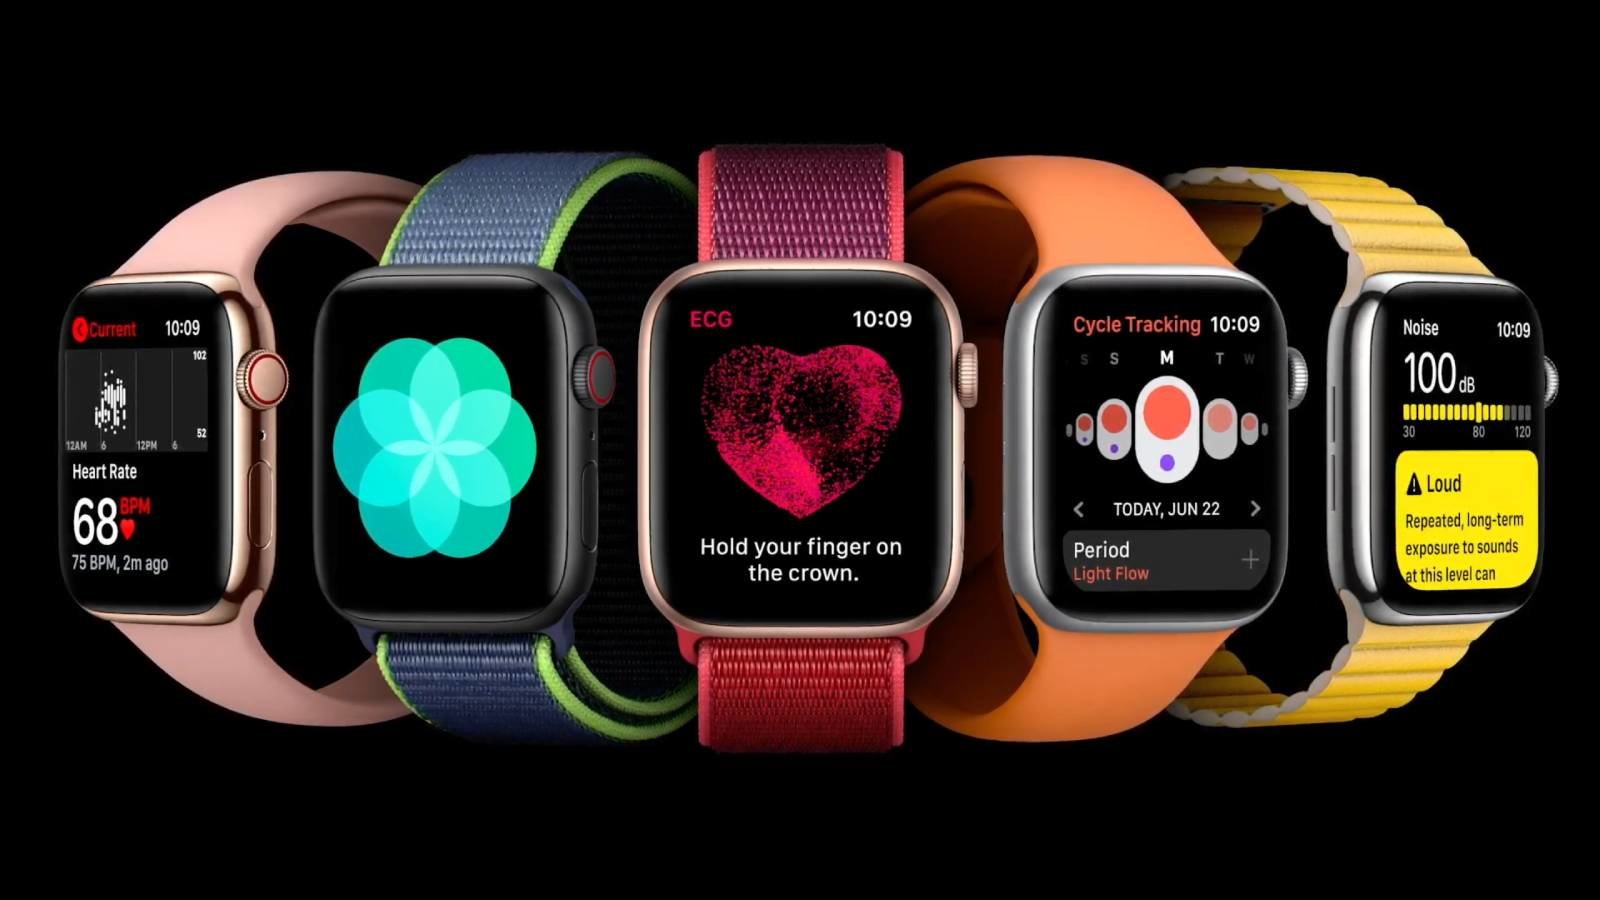 Apple Watch Series 7 expected to have a blood sugar monitor